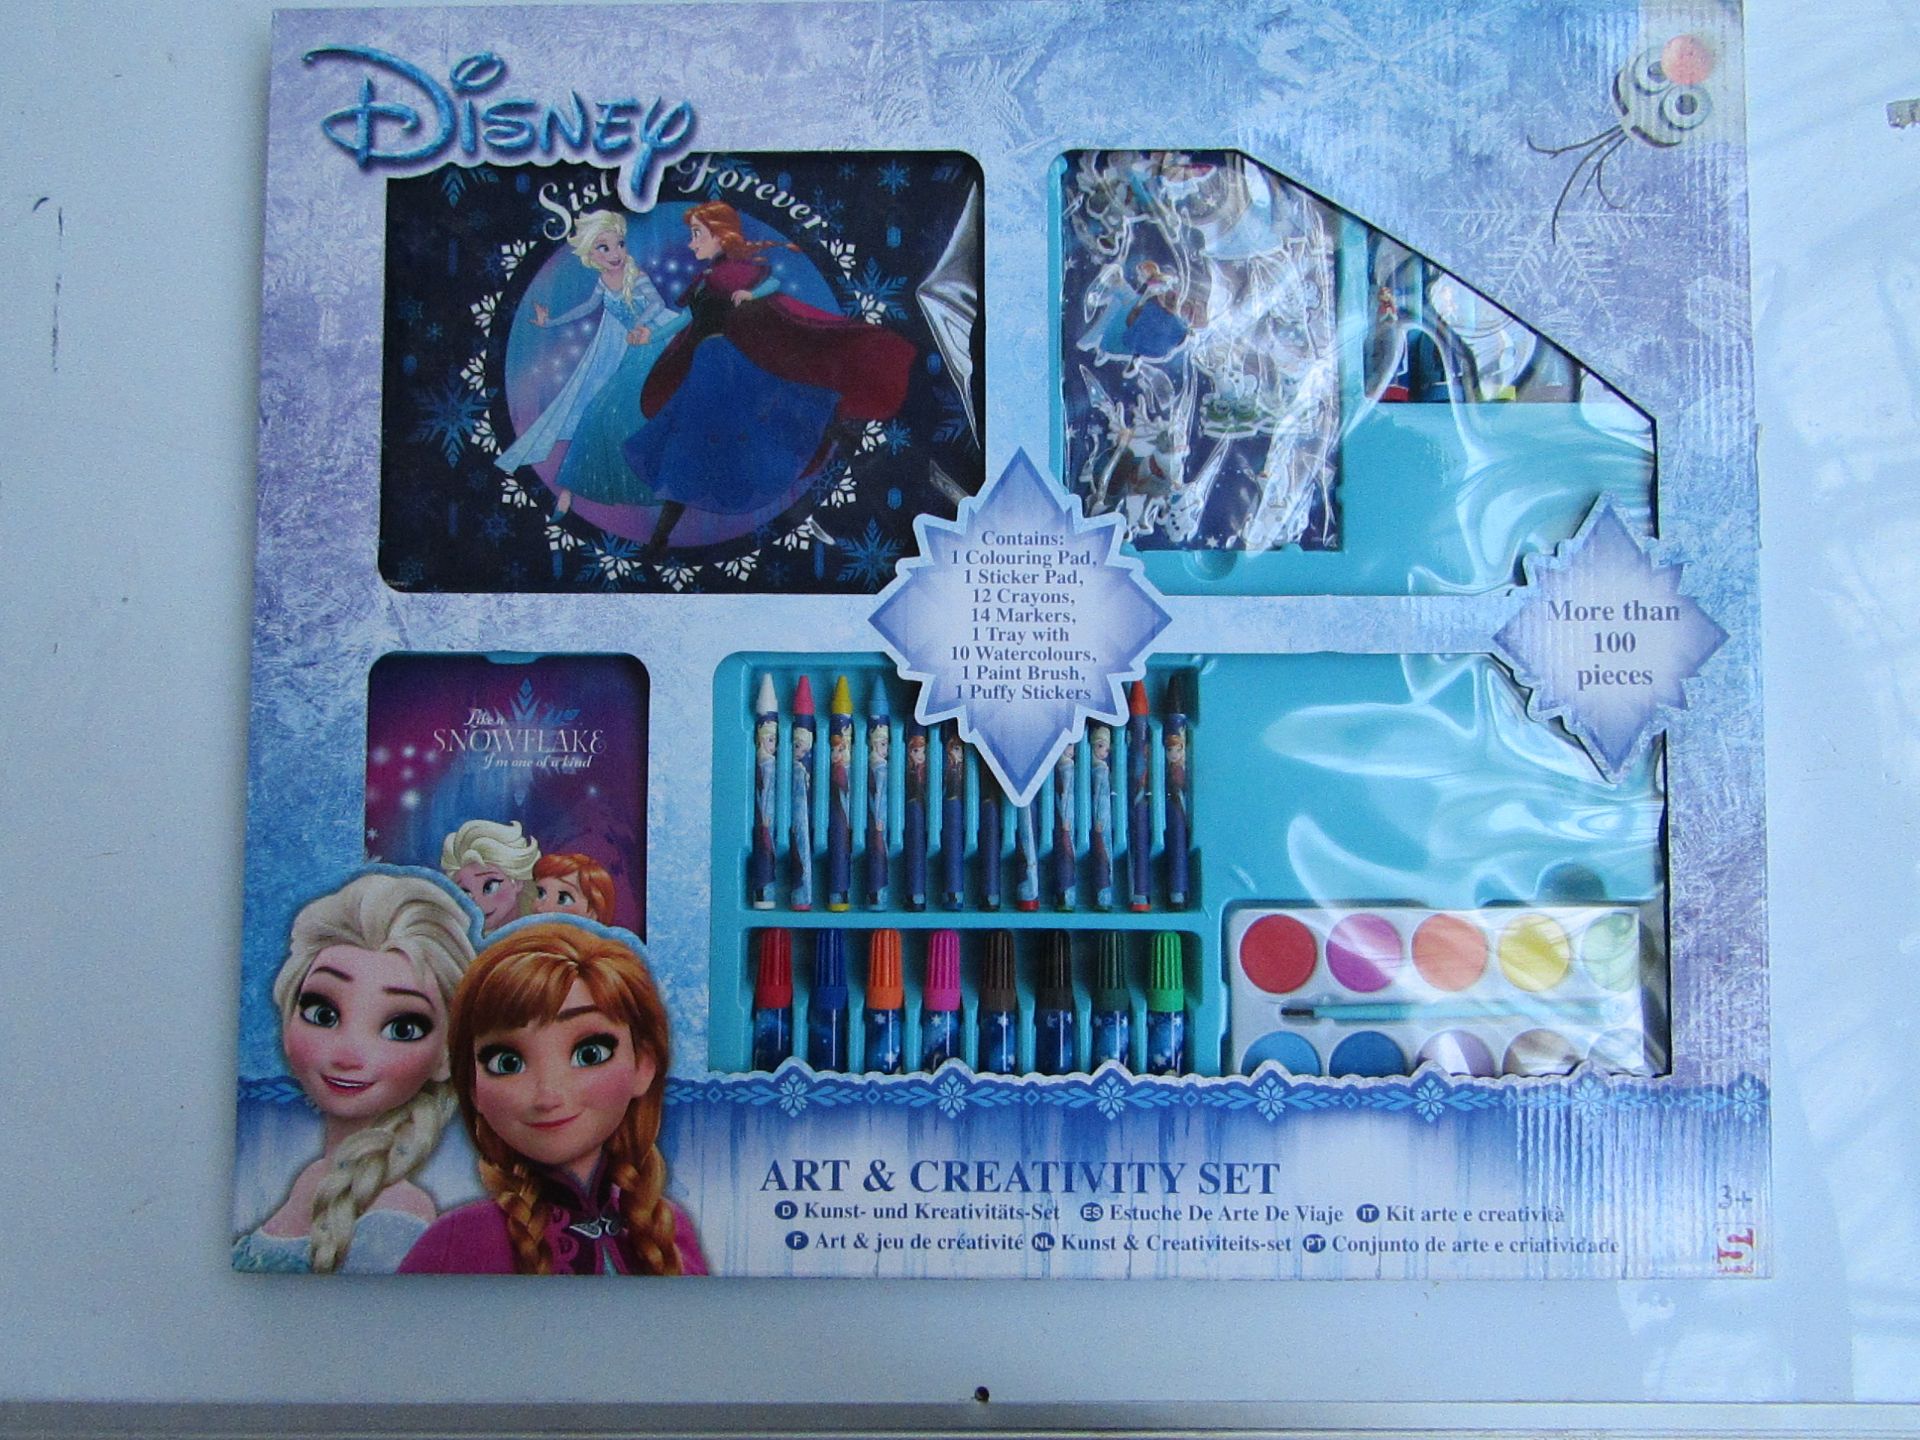 Disney Frozen art and craft set, including over 100 pieces, new and packaged.